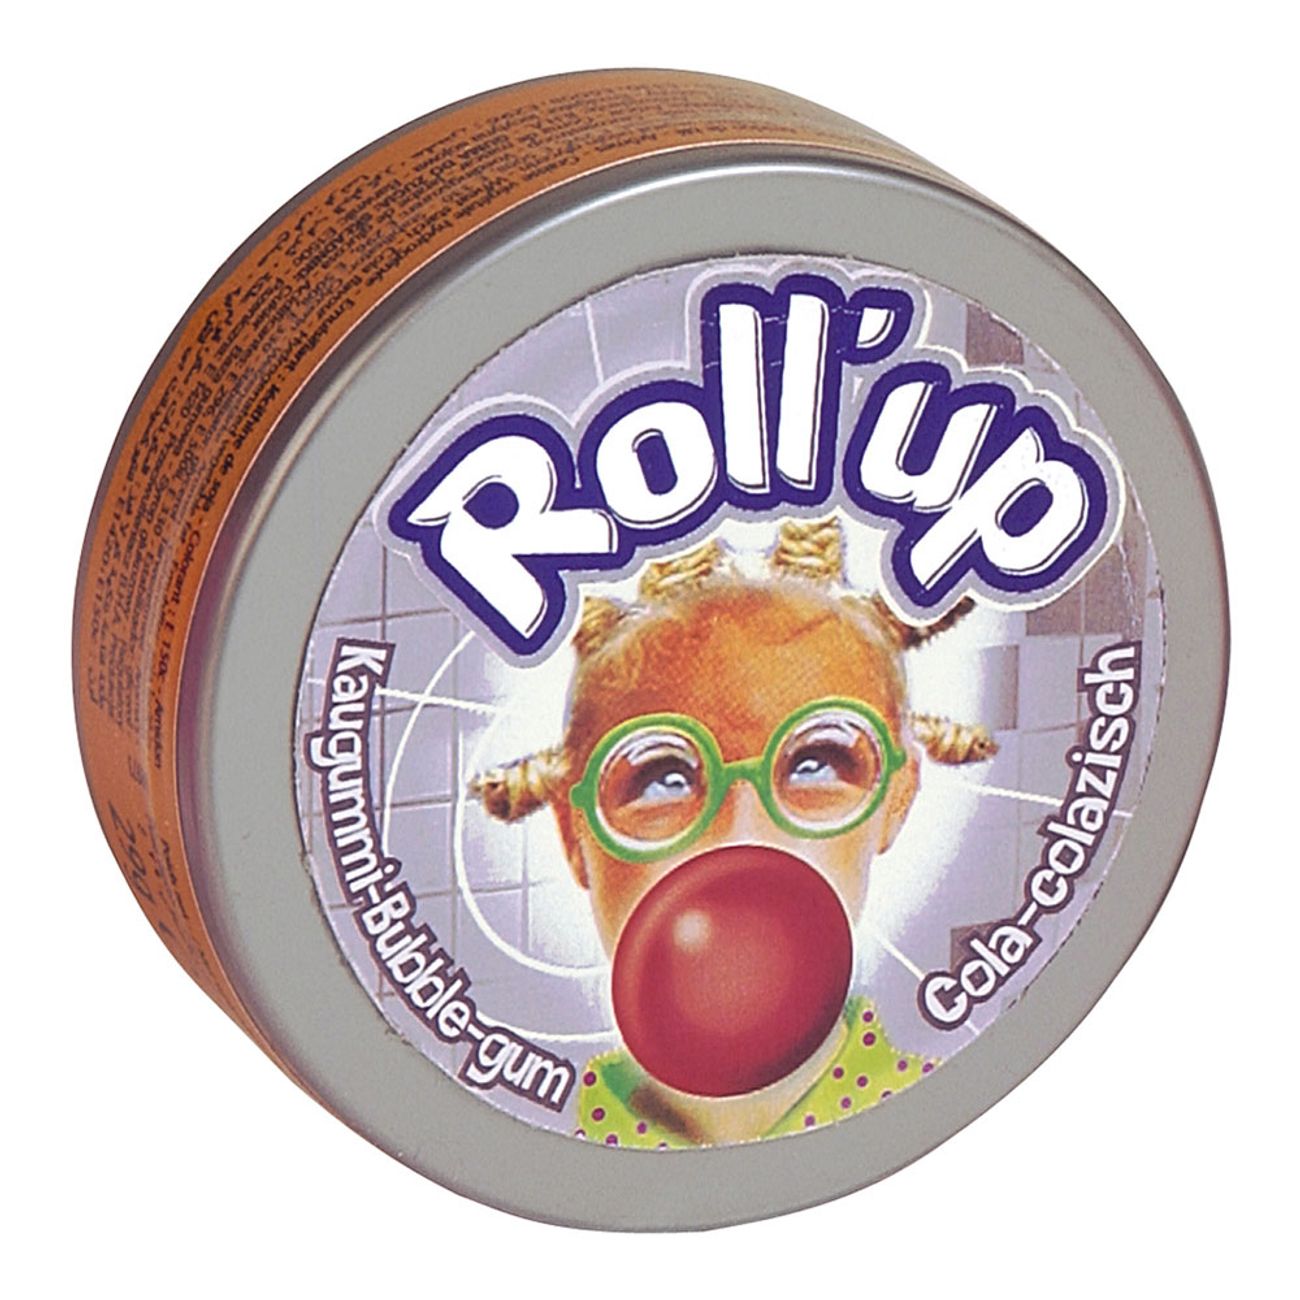 roll-up-cola-1